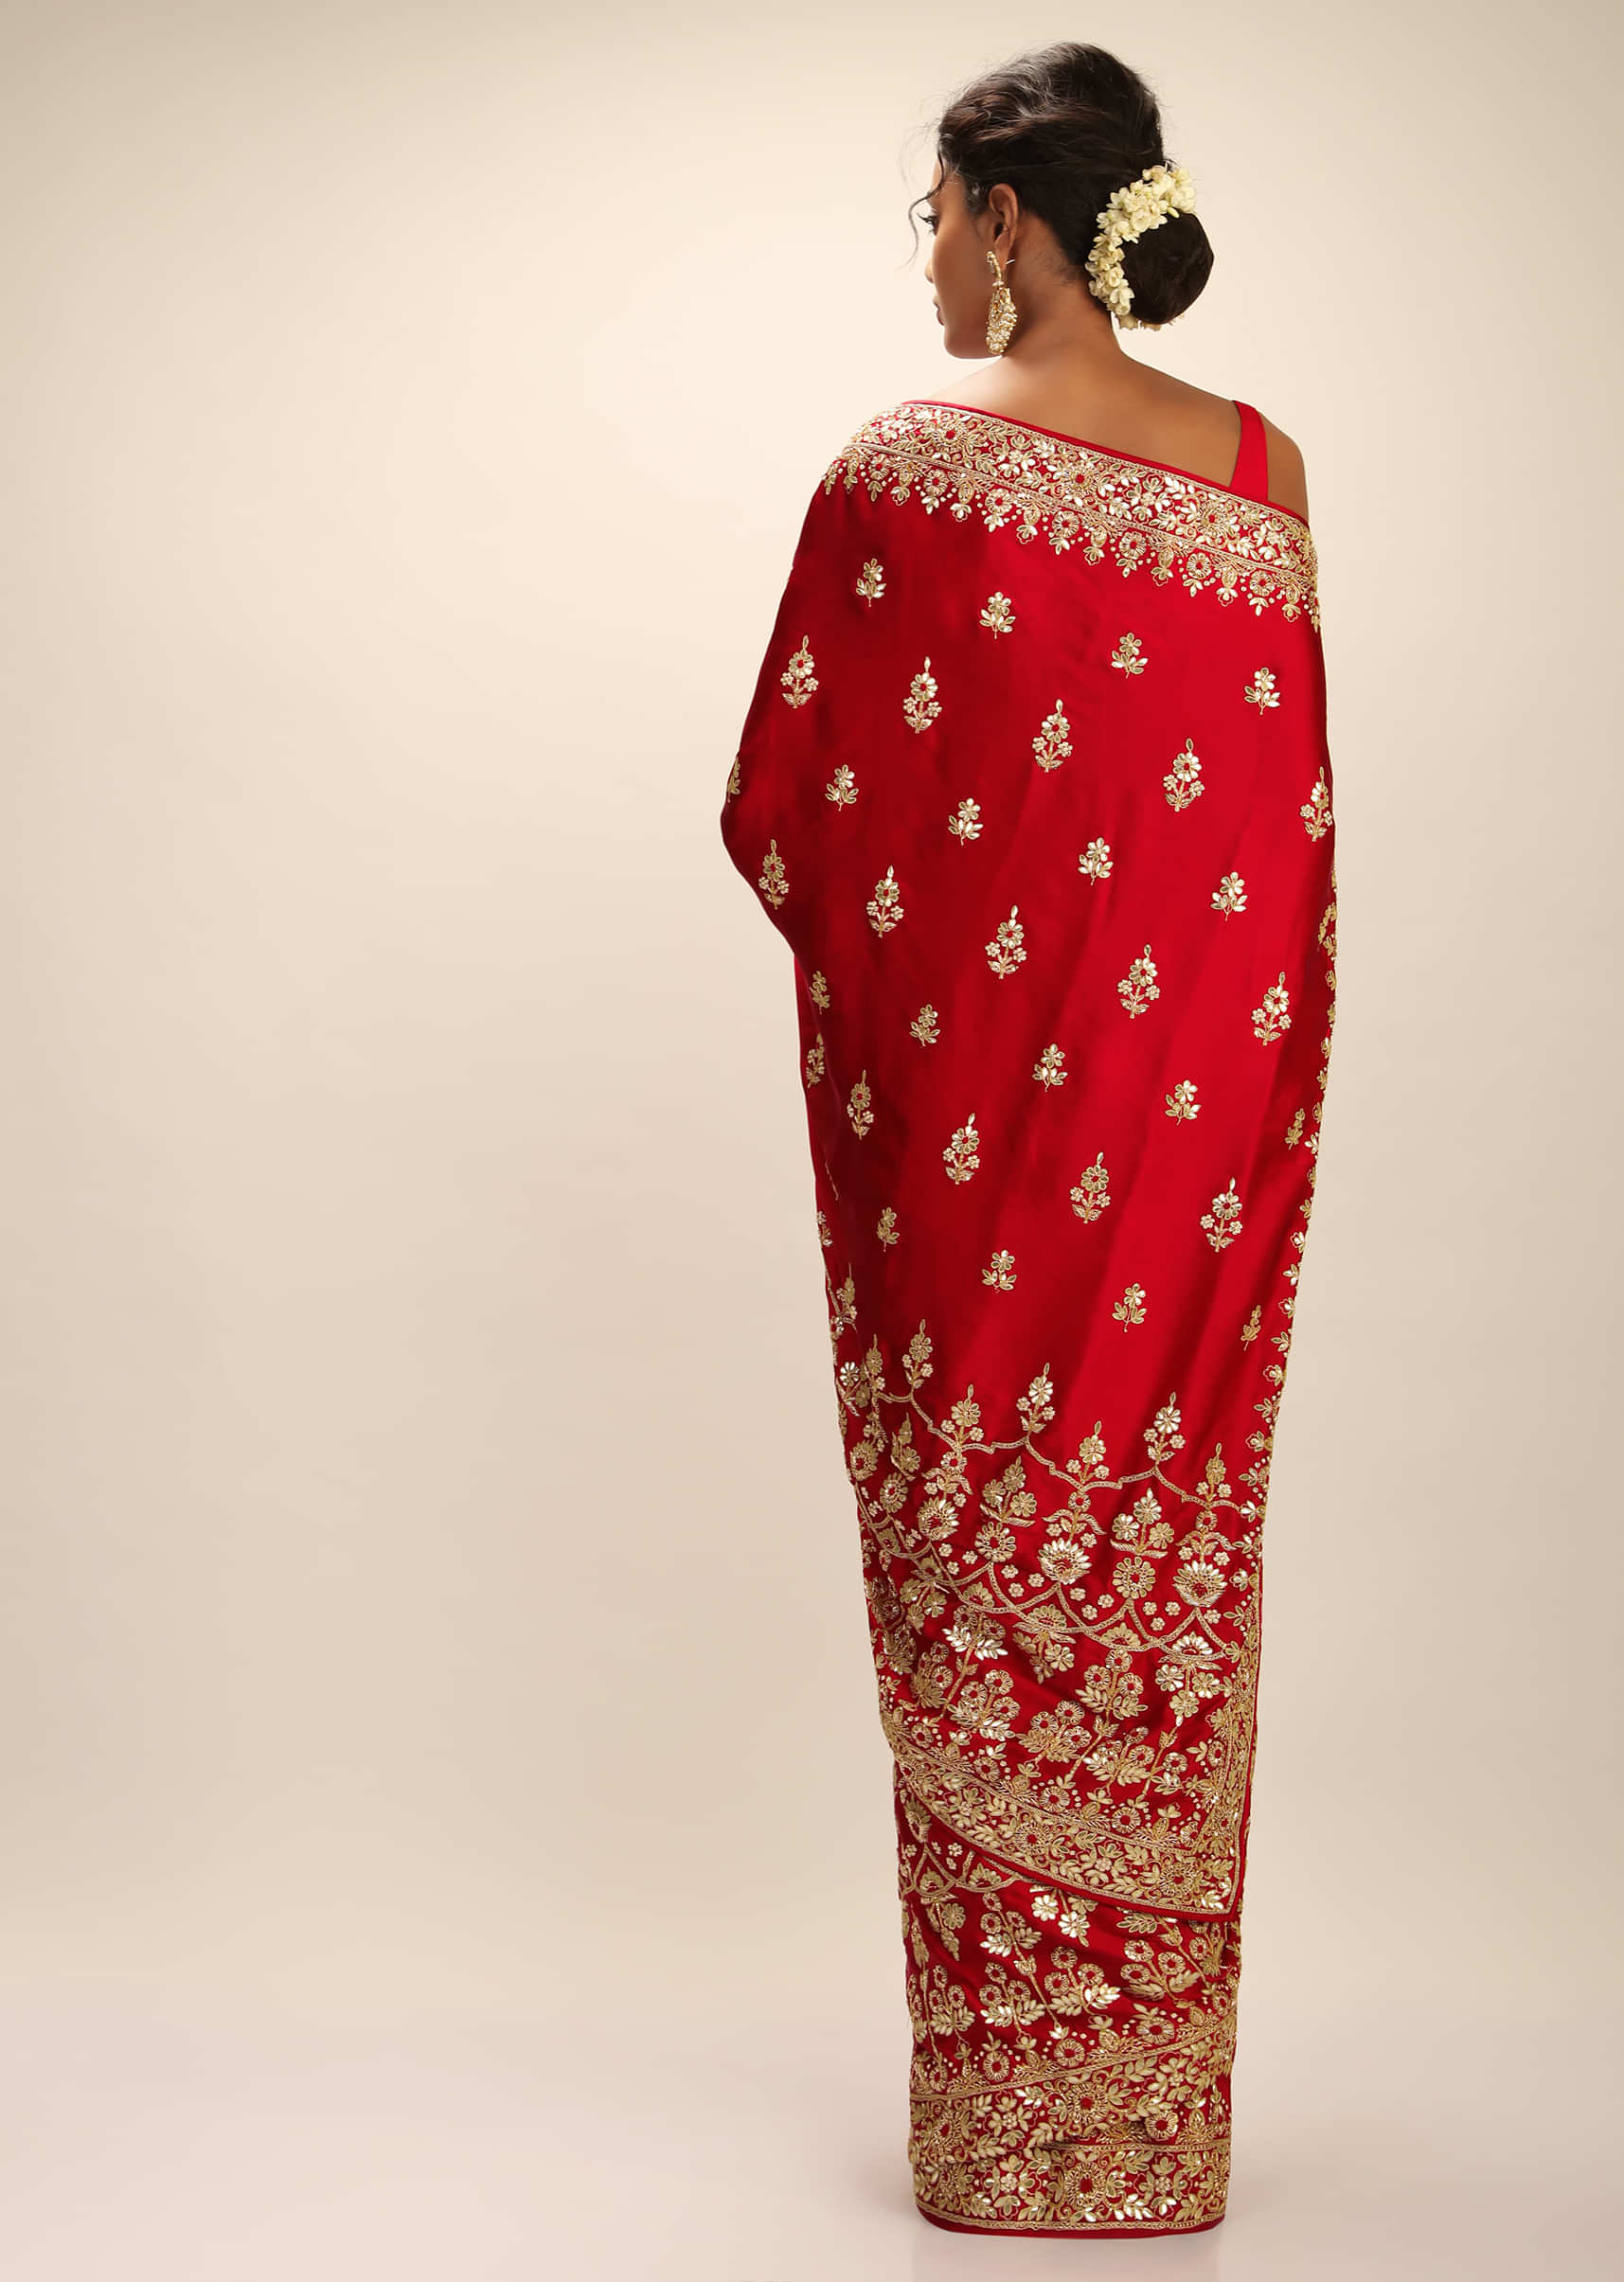 Scarlet Red Saree In Satin With Hand Embroidered Gotta Patti And Zardosi Work In Floral Motifs 